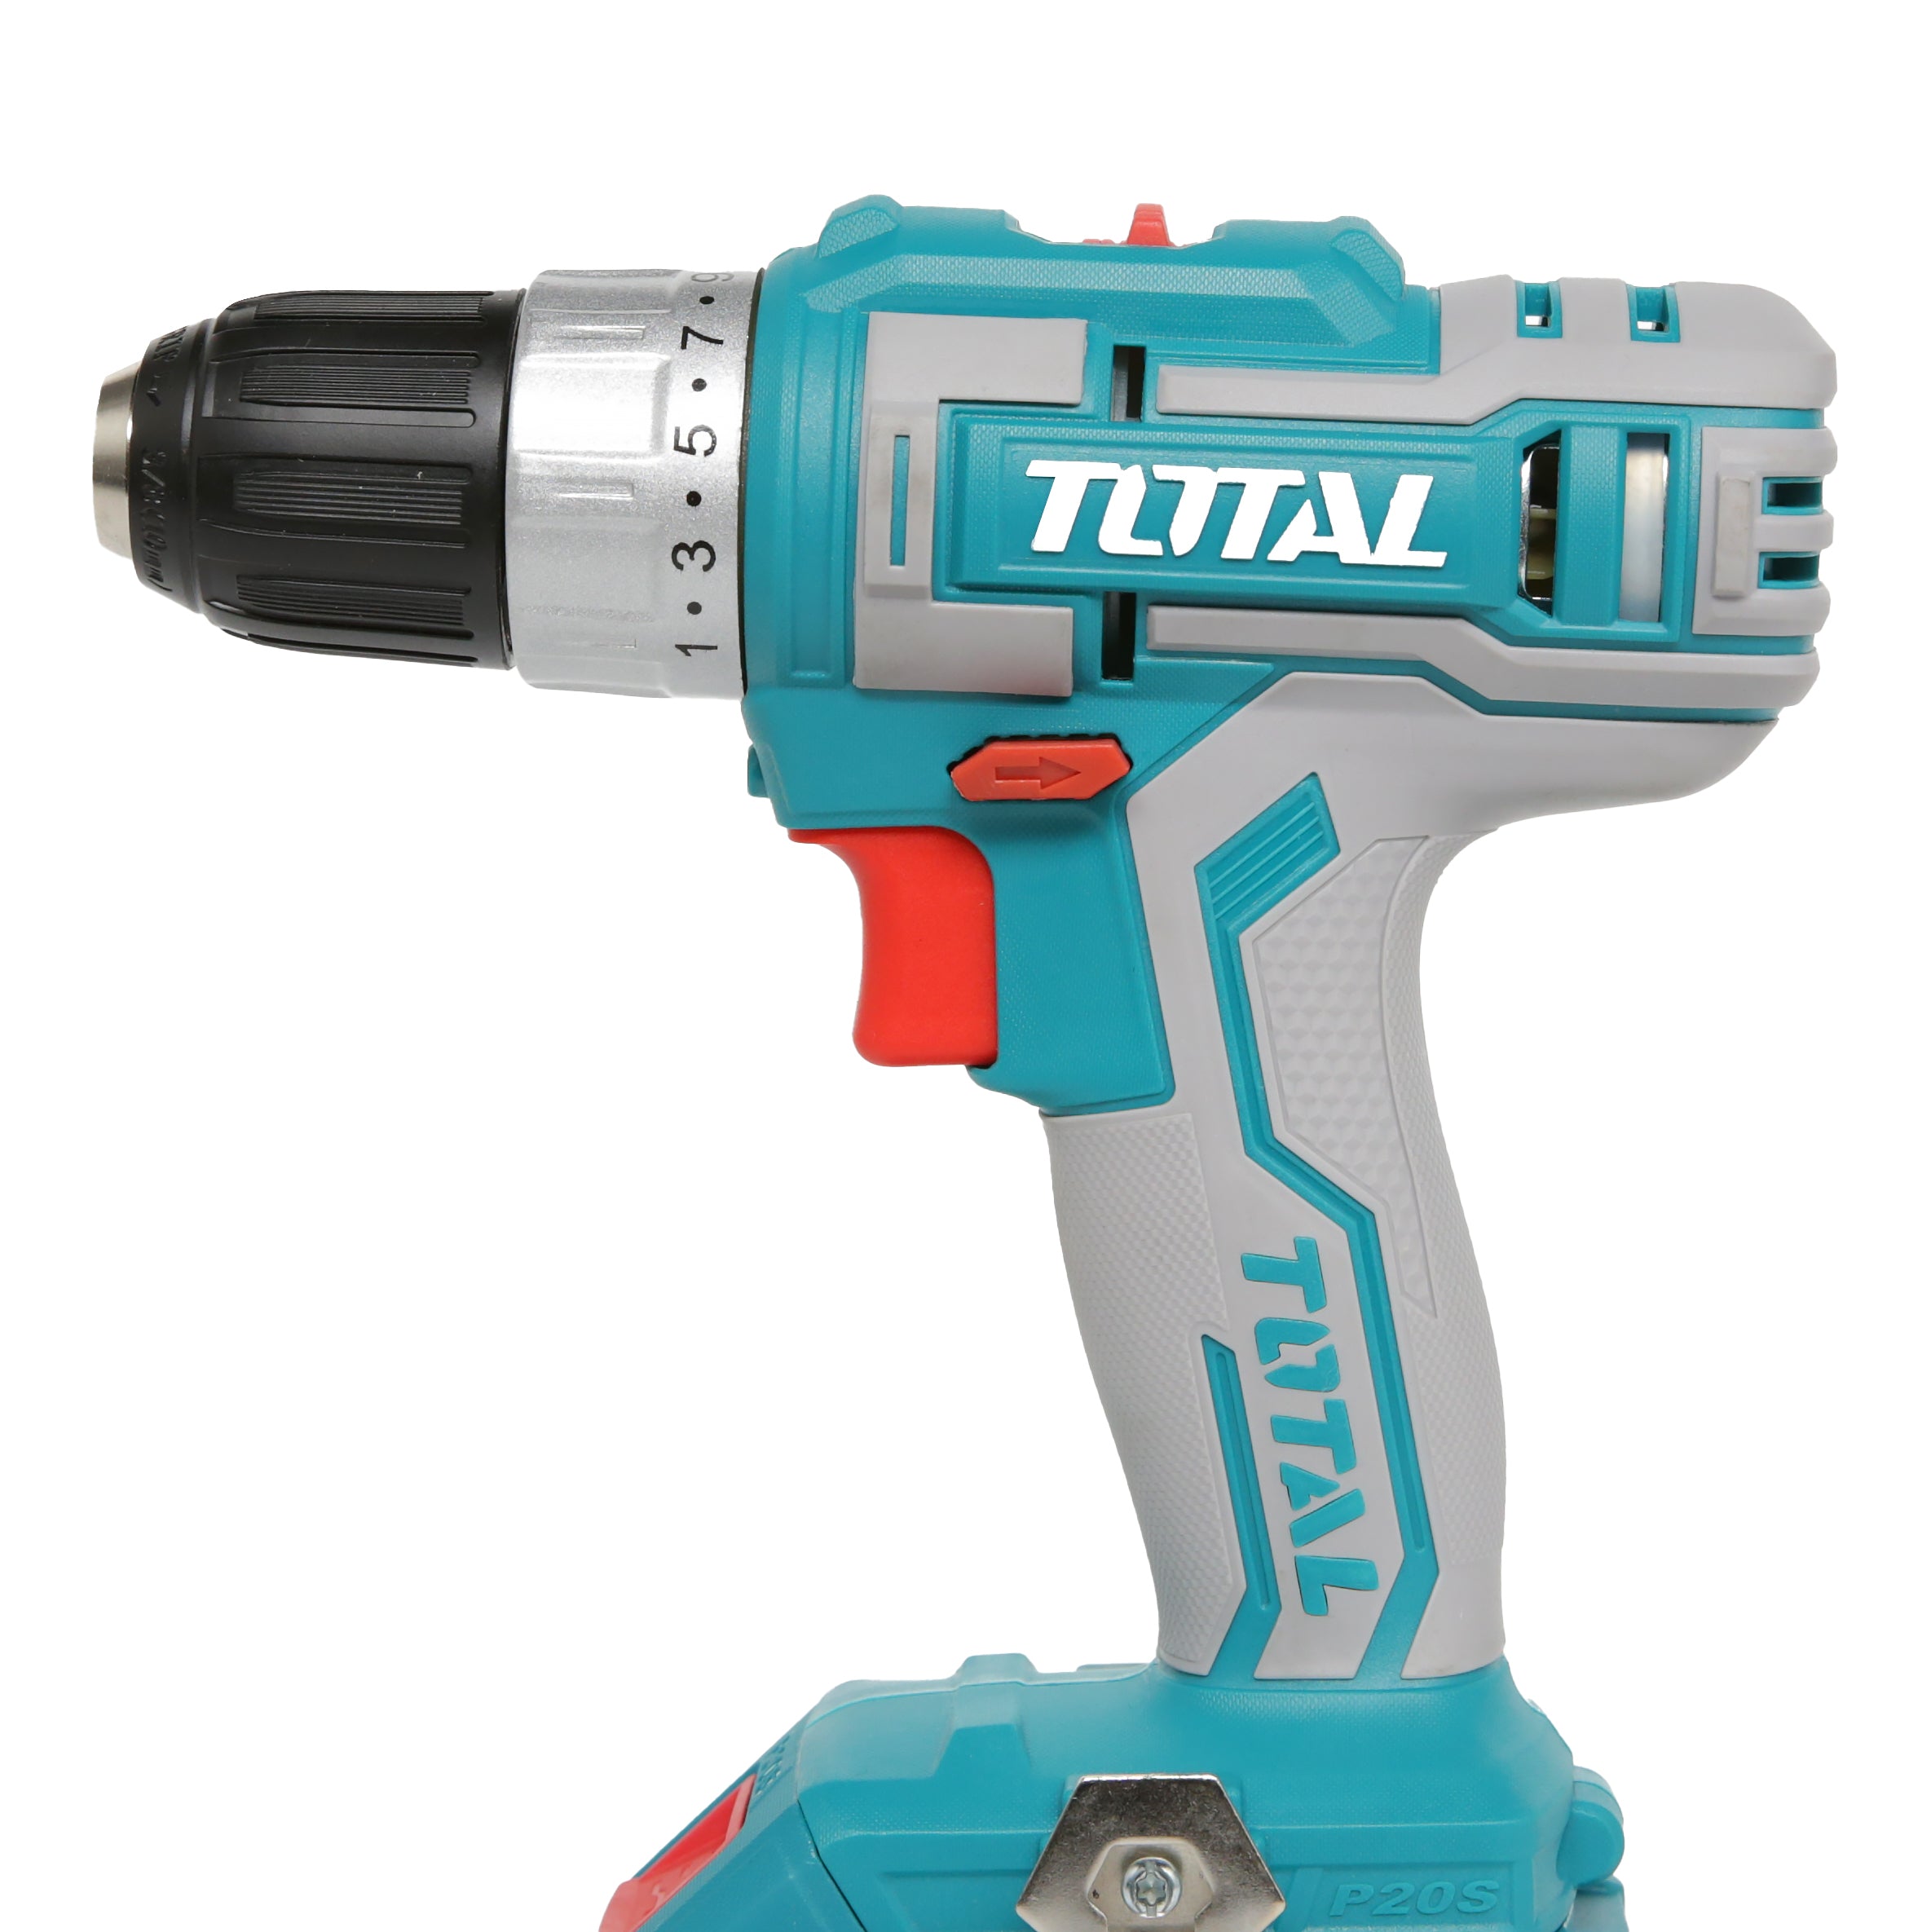 Total Li-Ion 20V Cordless Drill (with 2 x Batteries & Charger) - TDLI2002